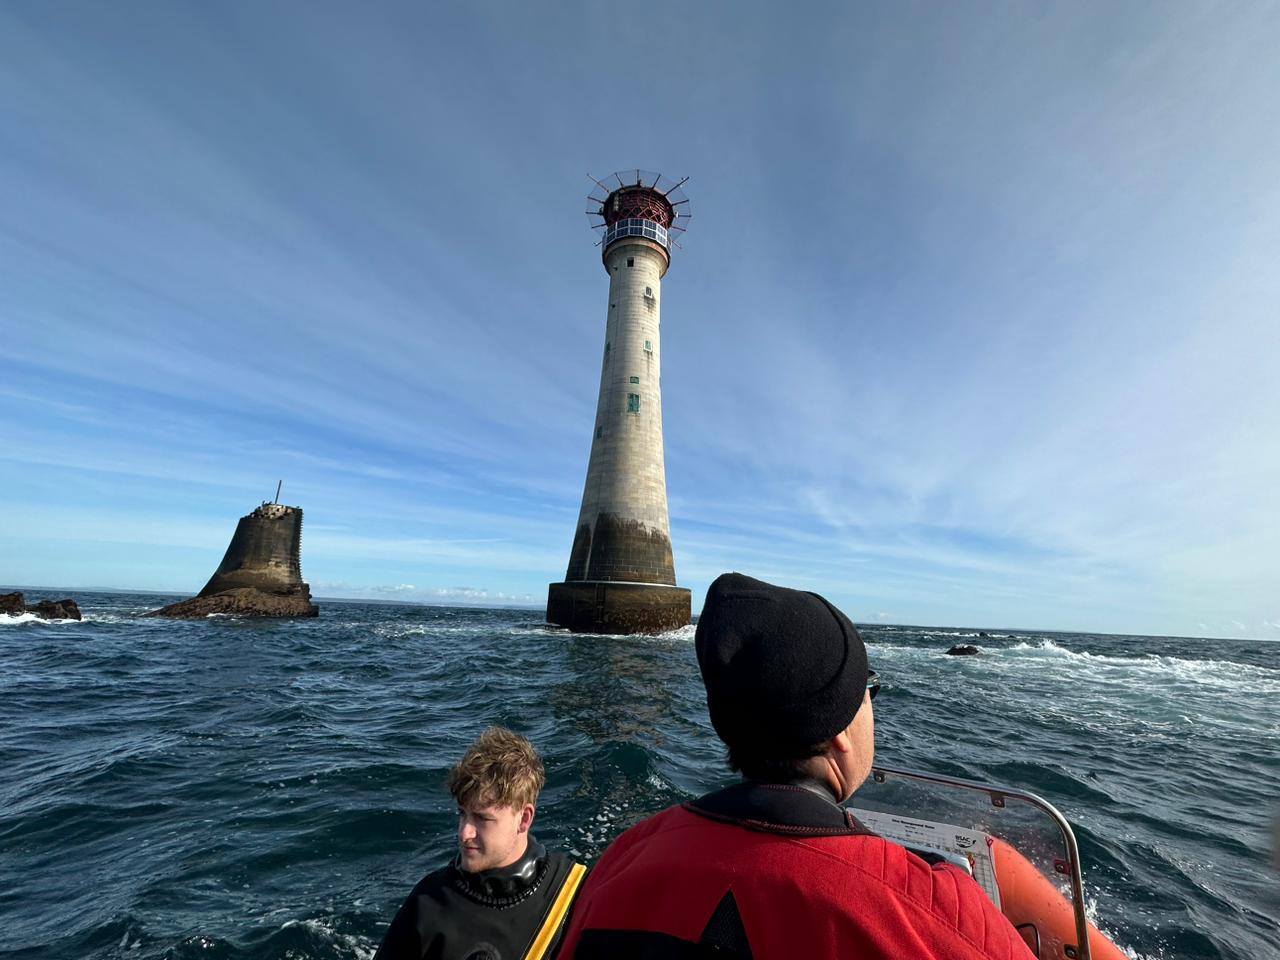 Eddystone Lighthouse, former home to the famous lead-eating Henry Hall